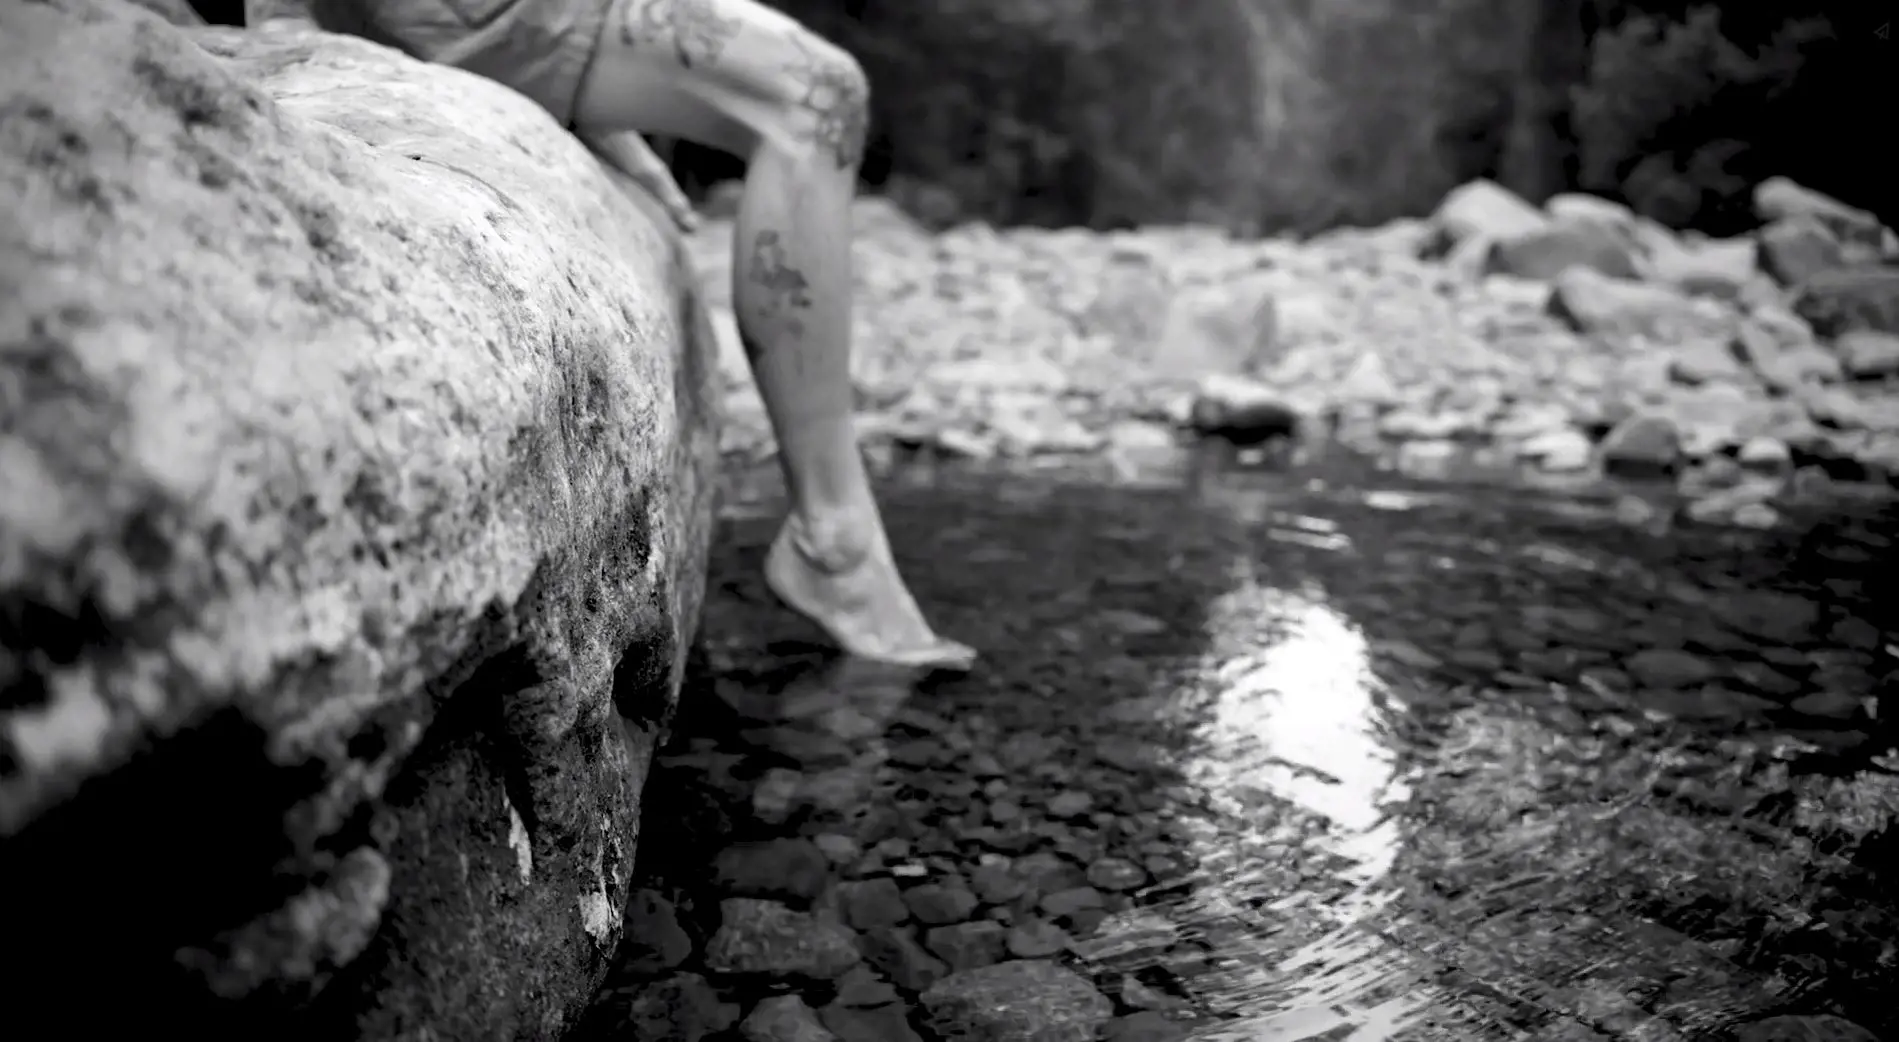 A man with tatooed legs sits on a large rock and dips his toe in cold, clear water.